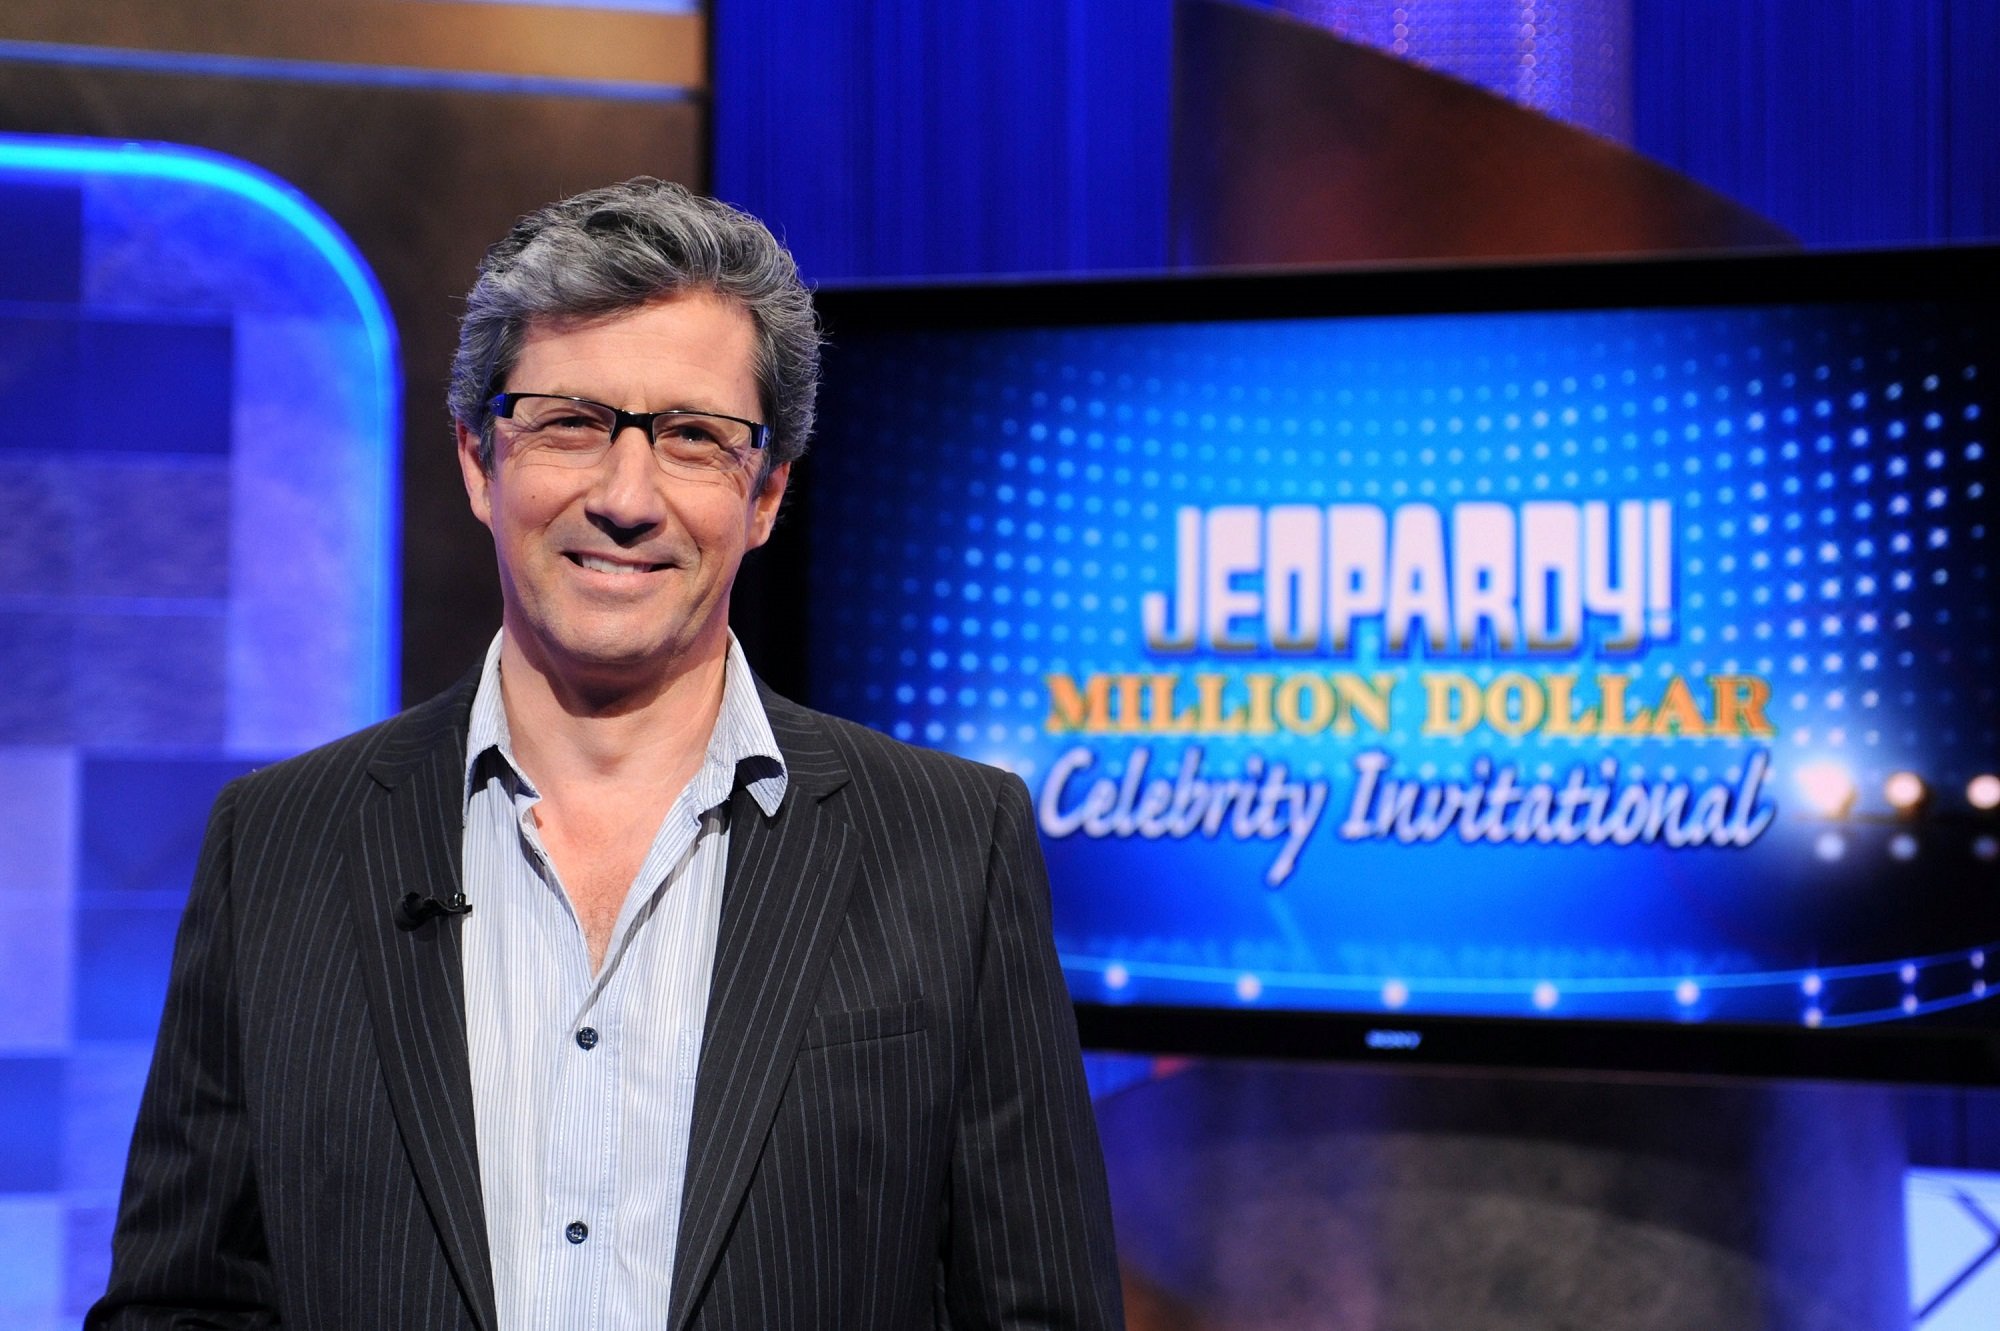 Charles Shaughnessy of Days of Our Lives and General Hospitalin a blue tailored suit with the Jeopardy! logo behind him